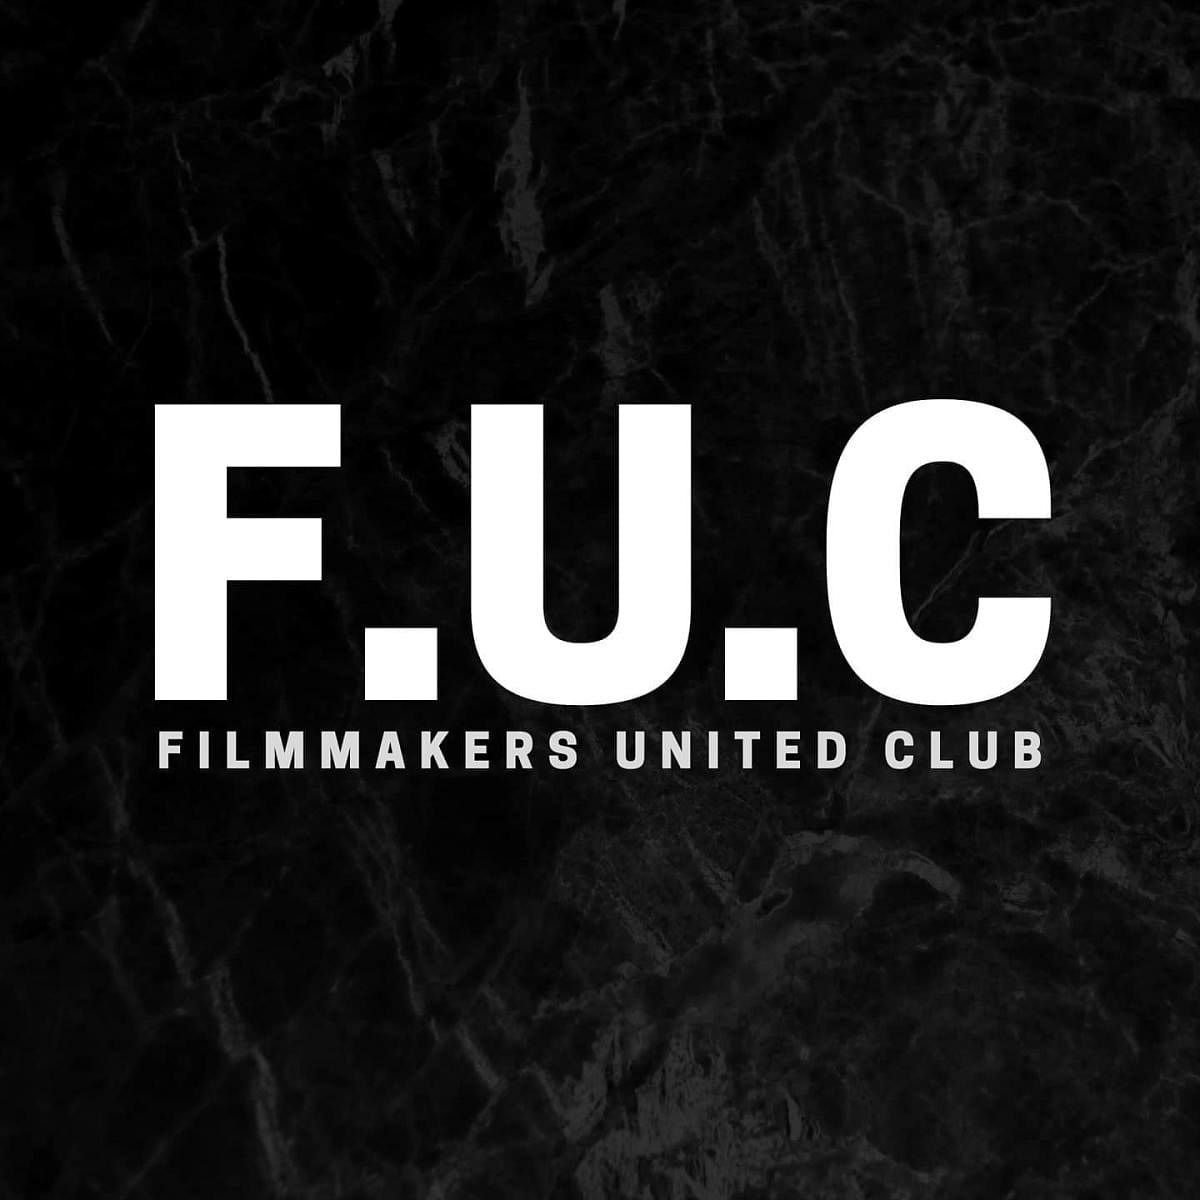 A club for filmmakers